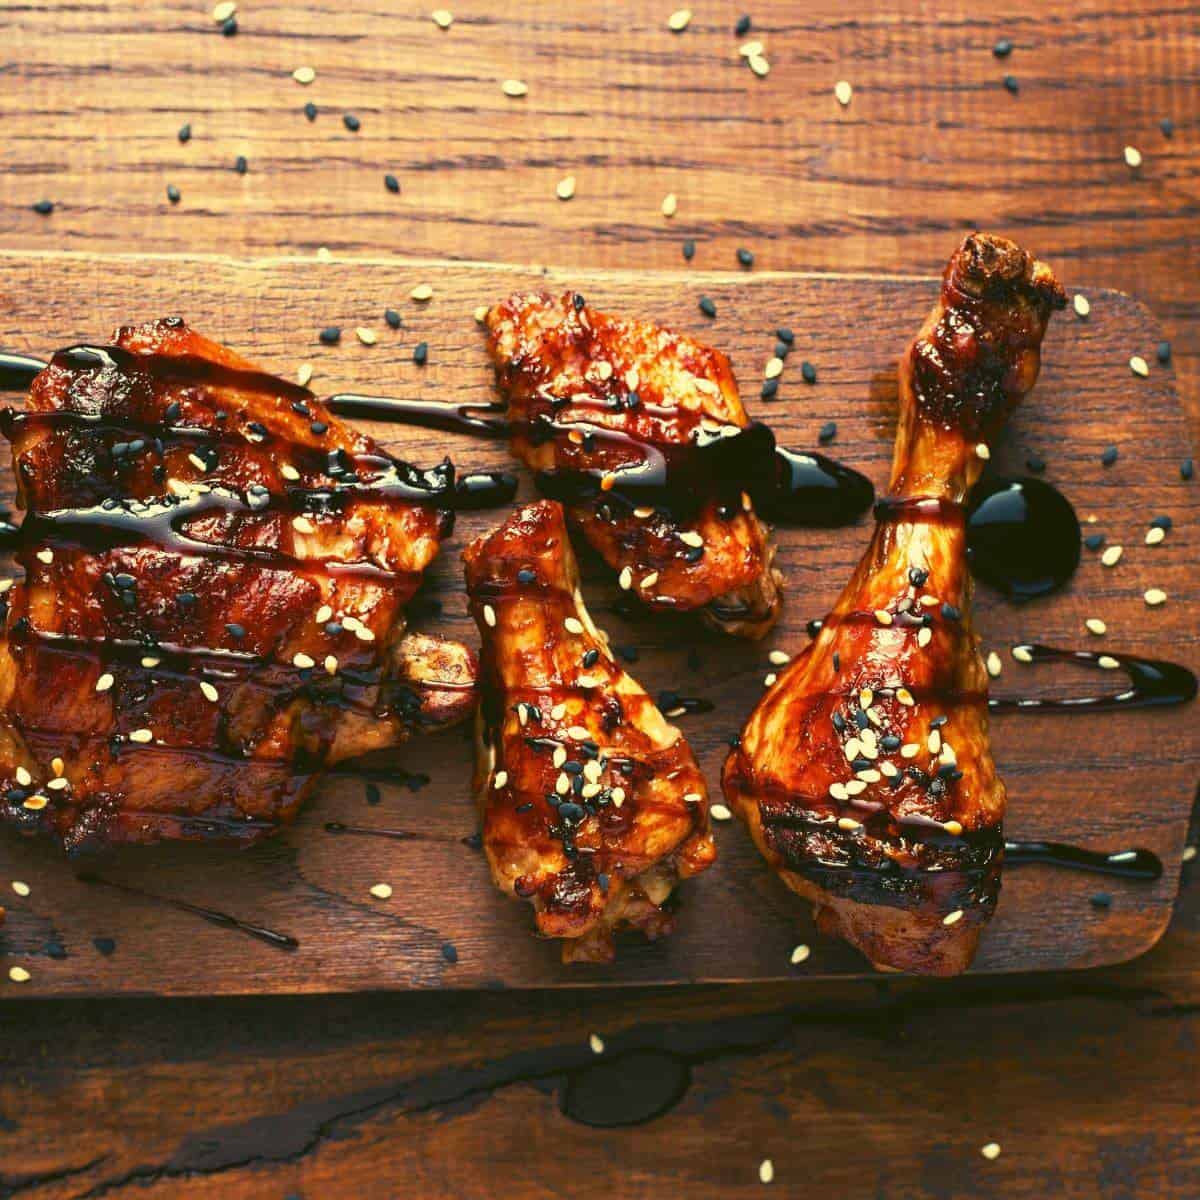 How to Make Scrumptious Chicken Legs with Balsamic Glaze